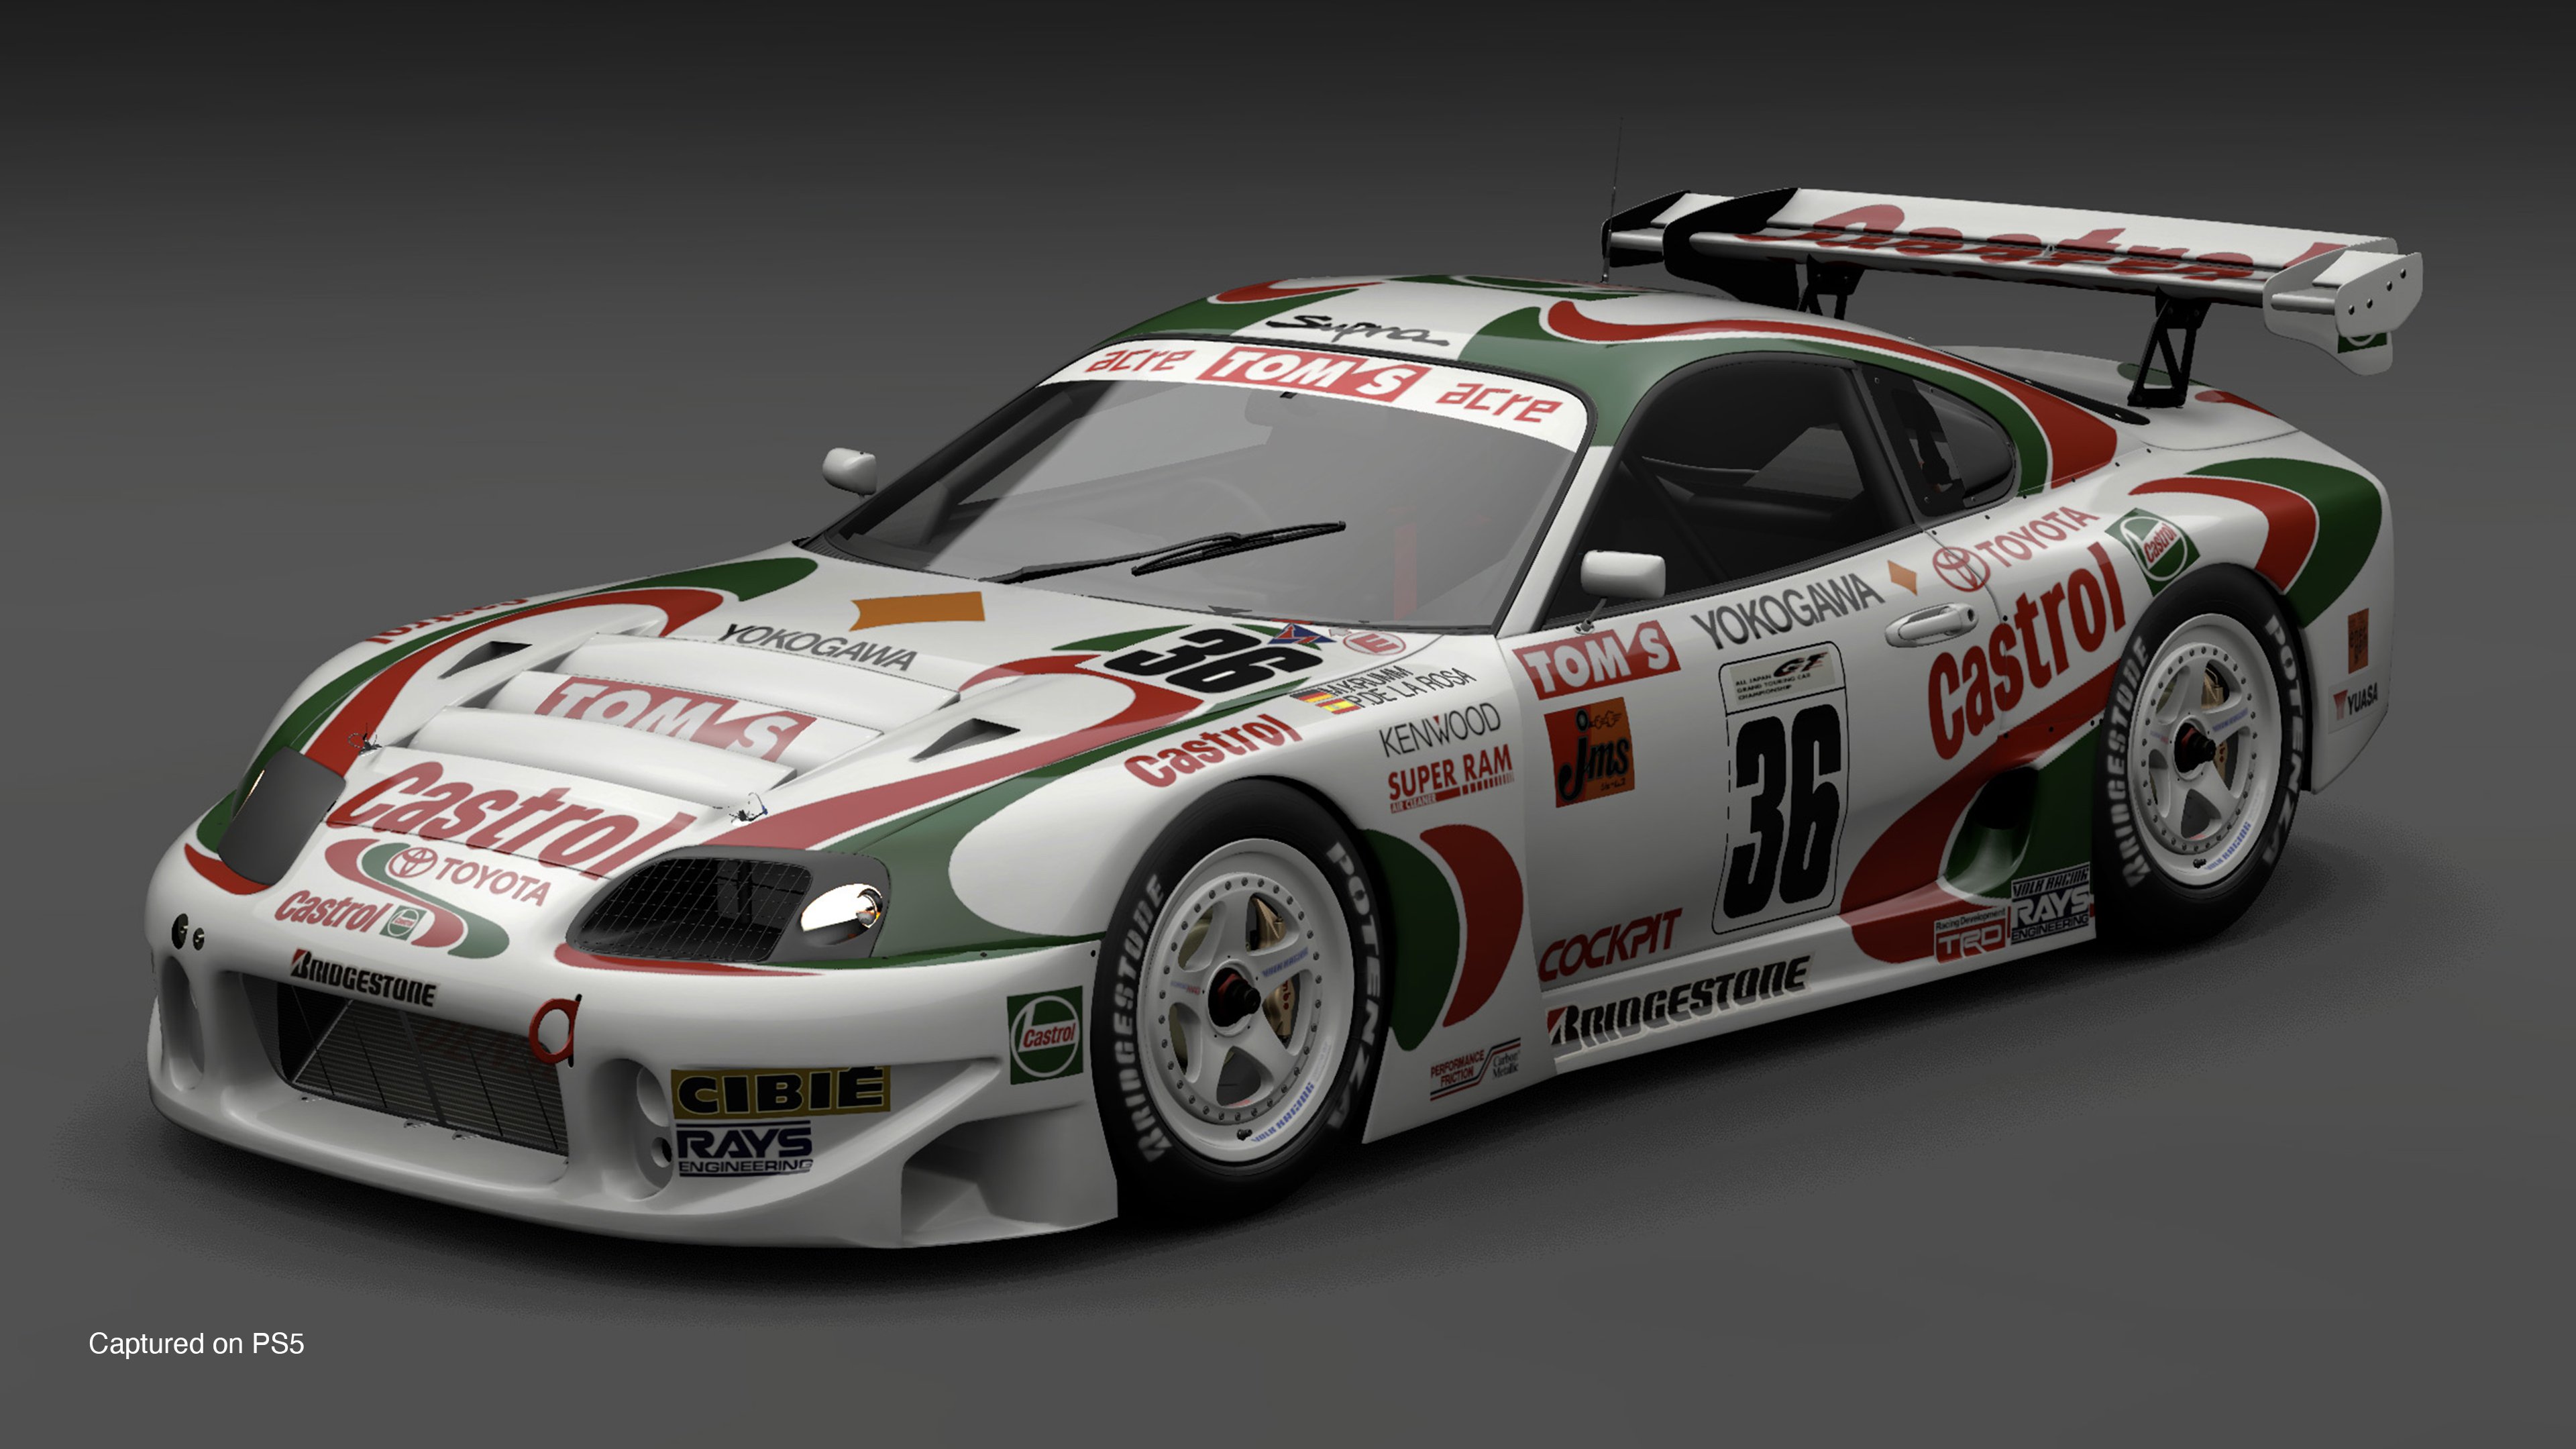 New Gran Turismo 7 PS5 Screenshots Reveal Preorder Cars In Jaw